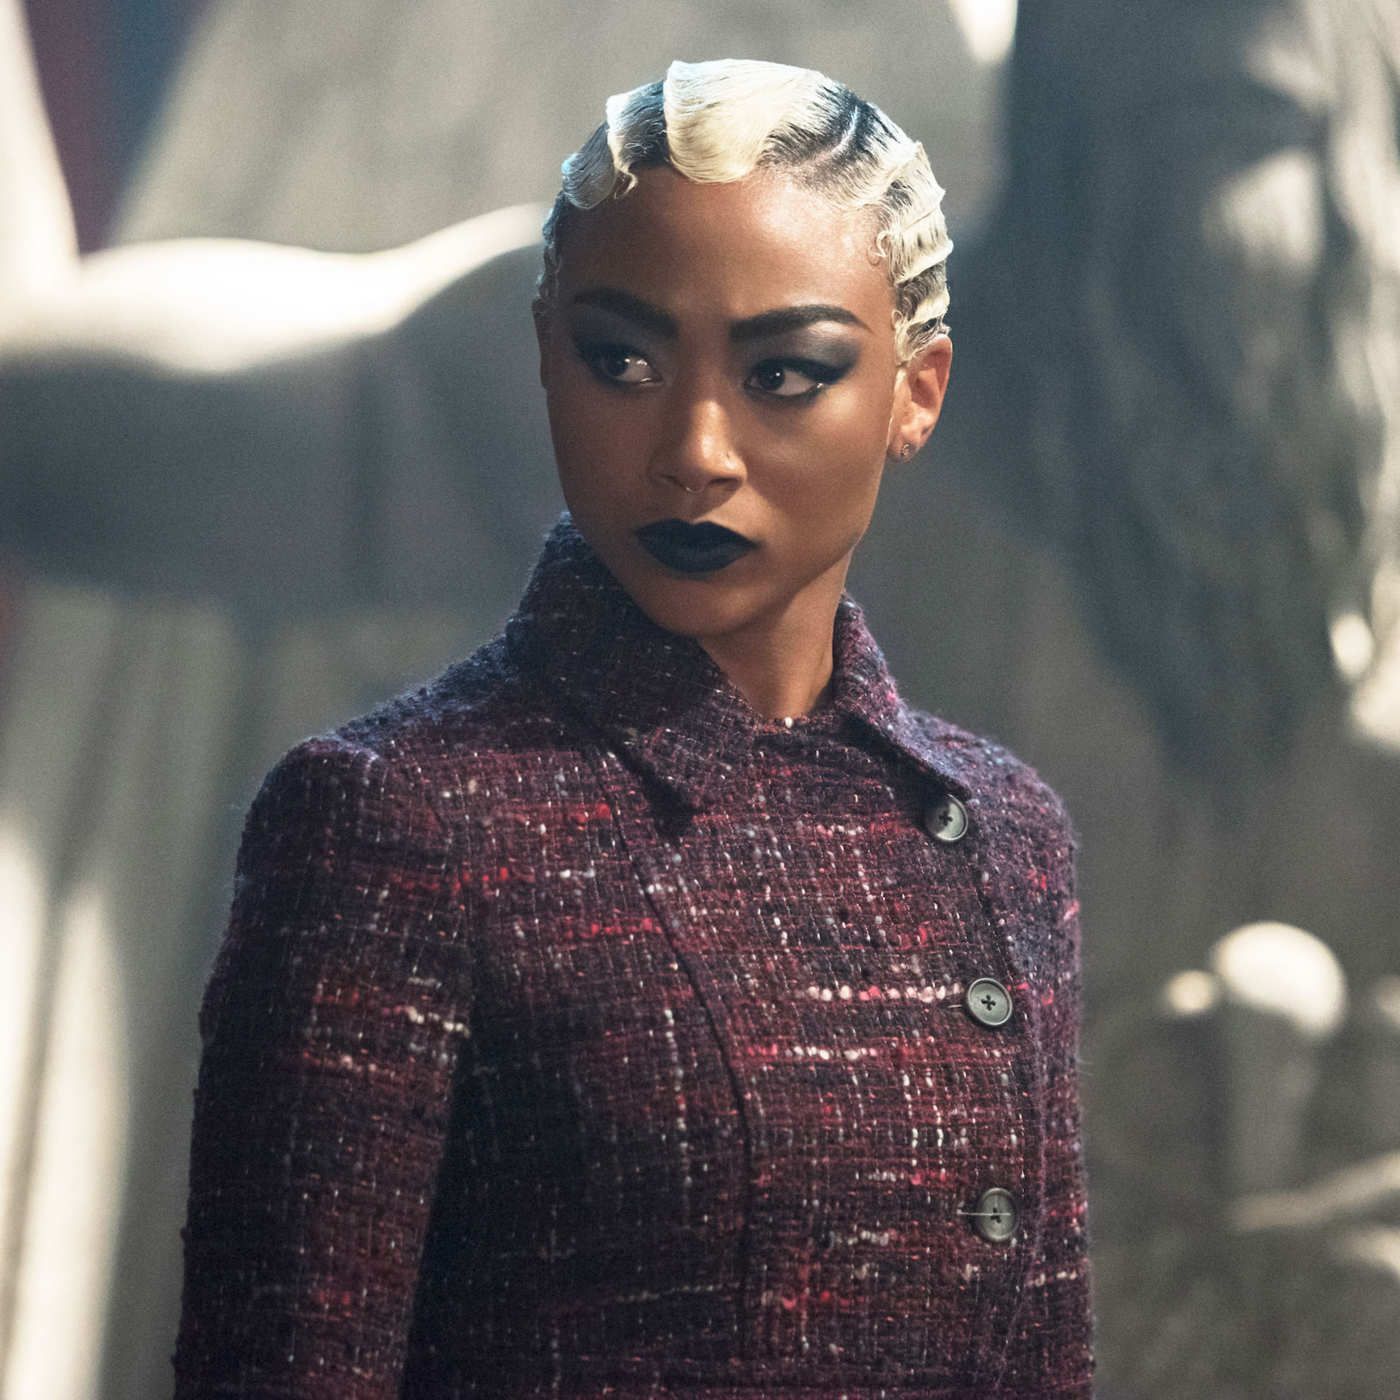 In Defense of Prudence Night on Chilling Adventures of Sabrina